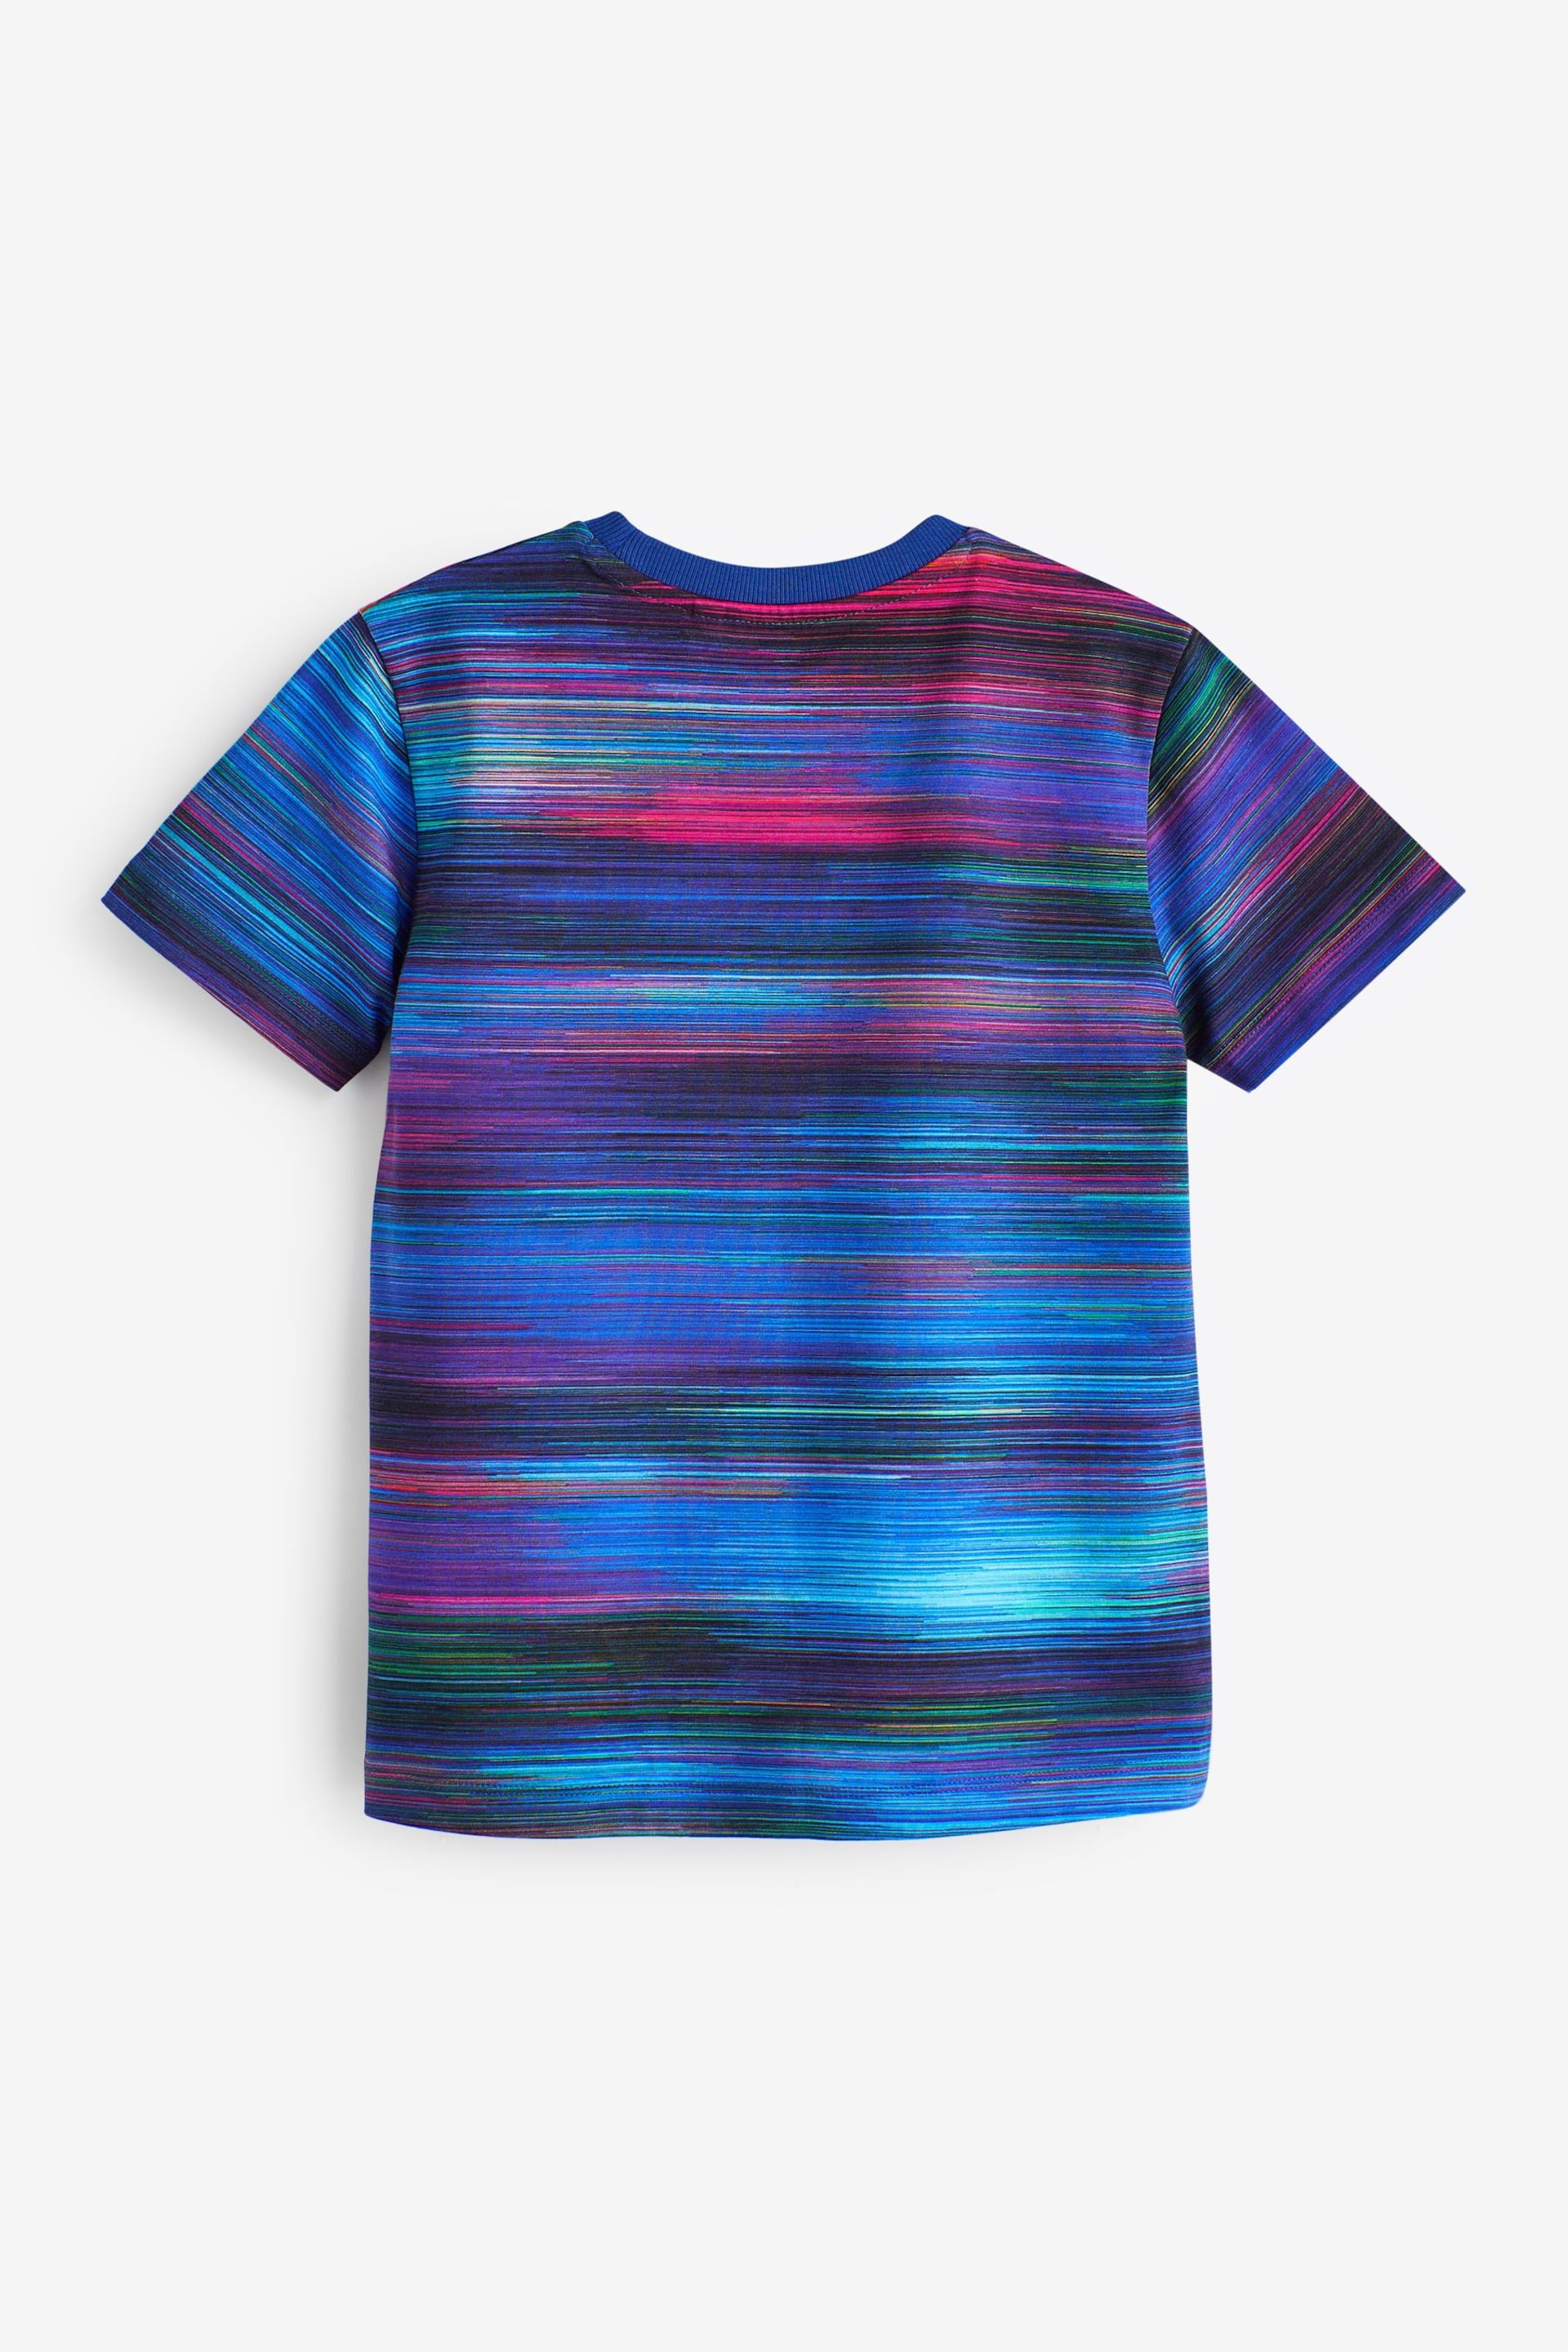 Blue purple All-Over Print Short Sleeve T-Shirt (3-16yrs) - Image 2 of 3